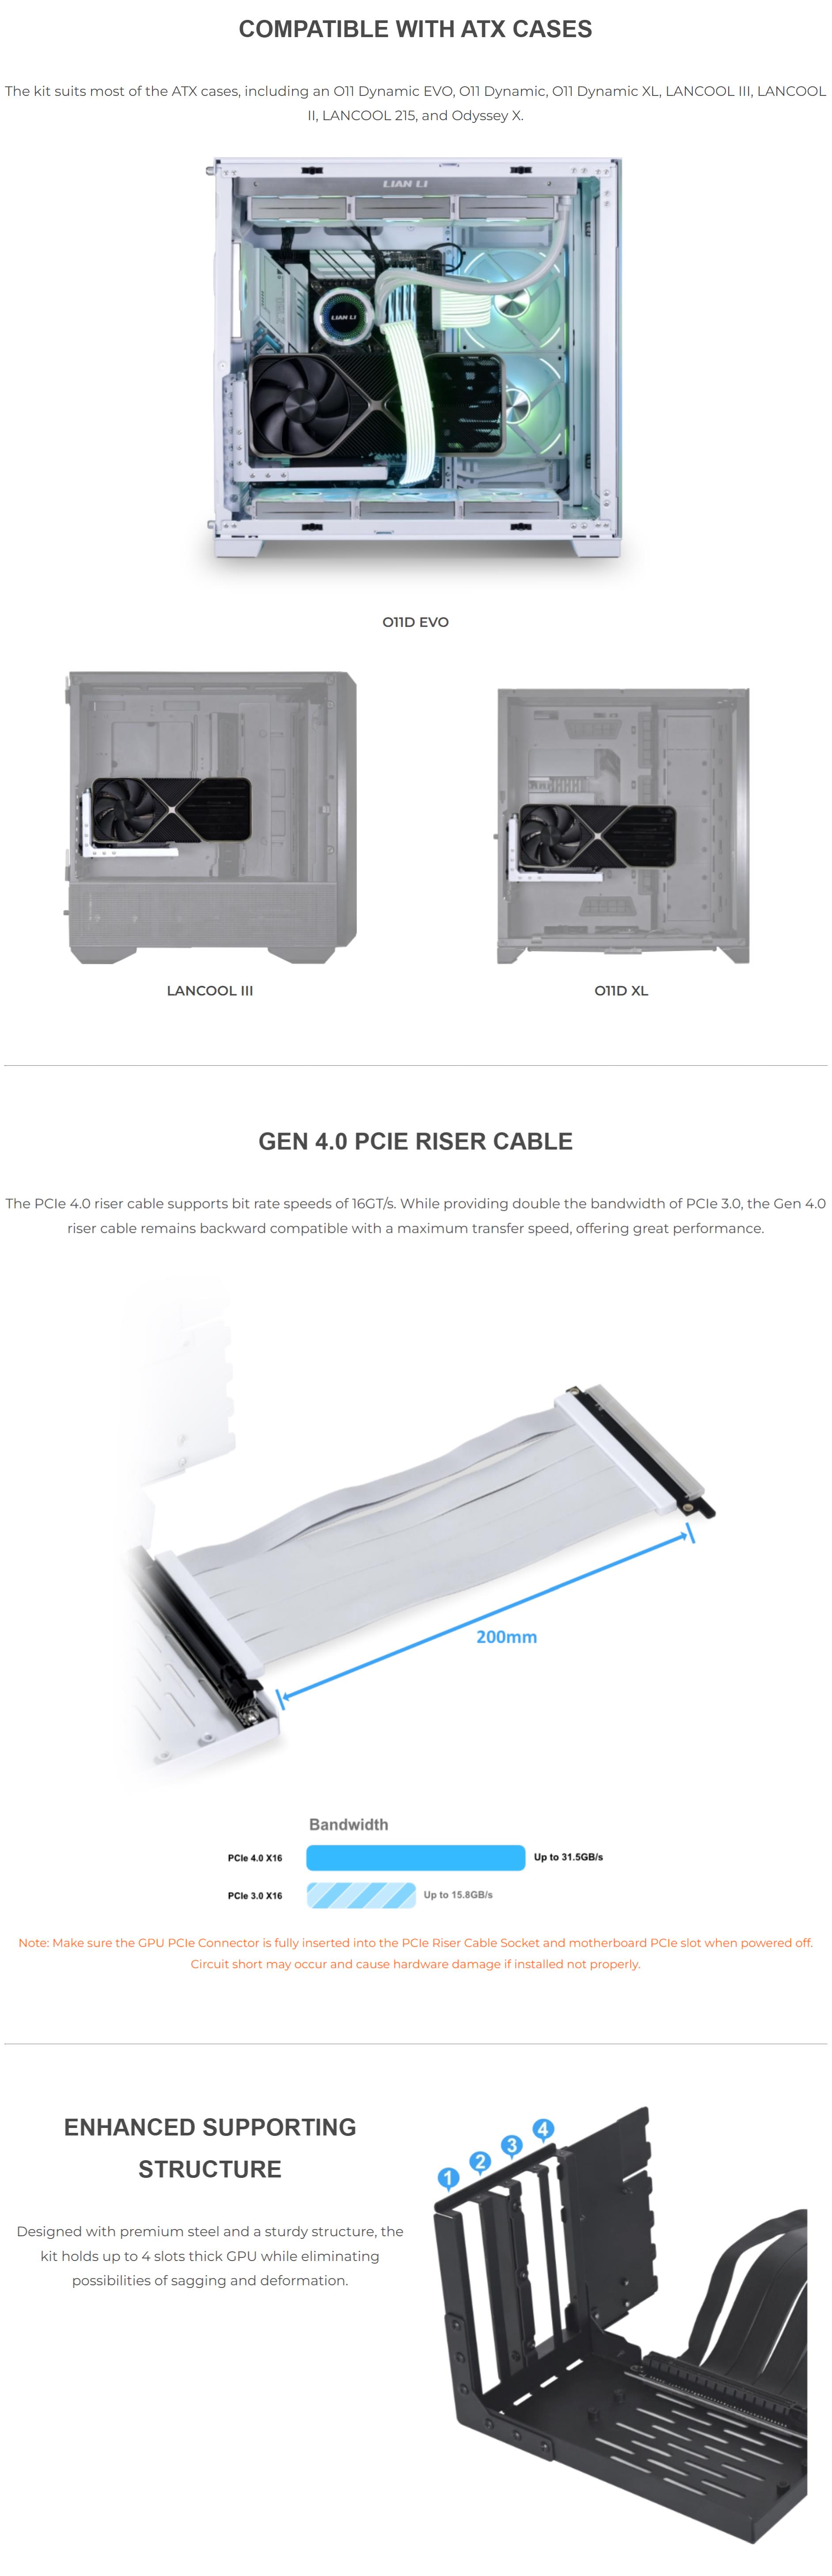 A large marketing image providing additional information about the product Lian Li G89.VG4-4W.00 Universal 4 Slots Vertical GPU Kit with Gen 4 Riser White - Additional alt info not provided